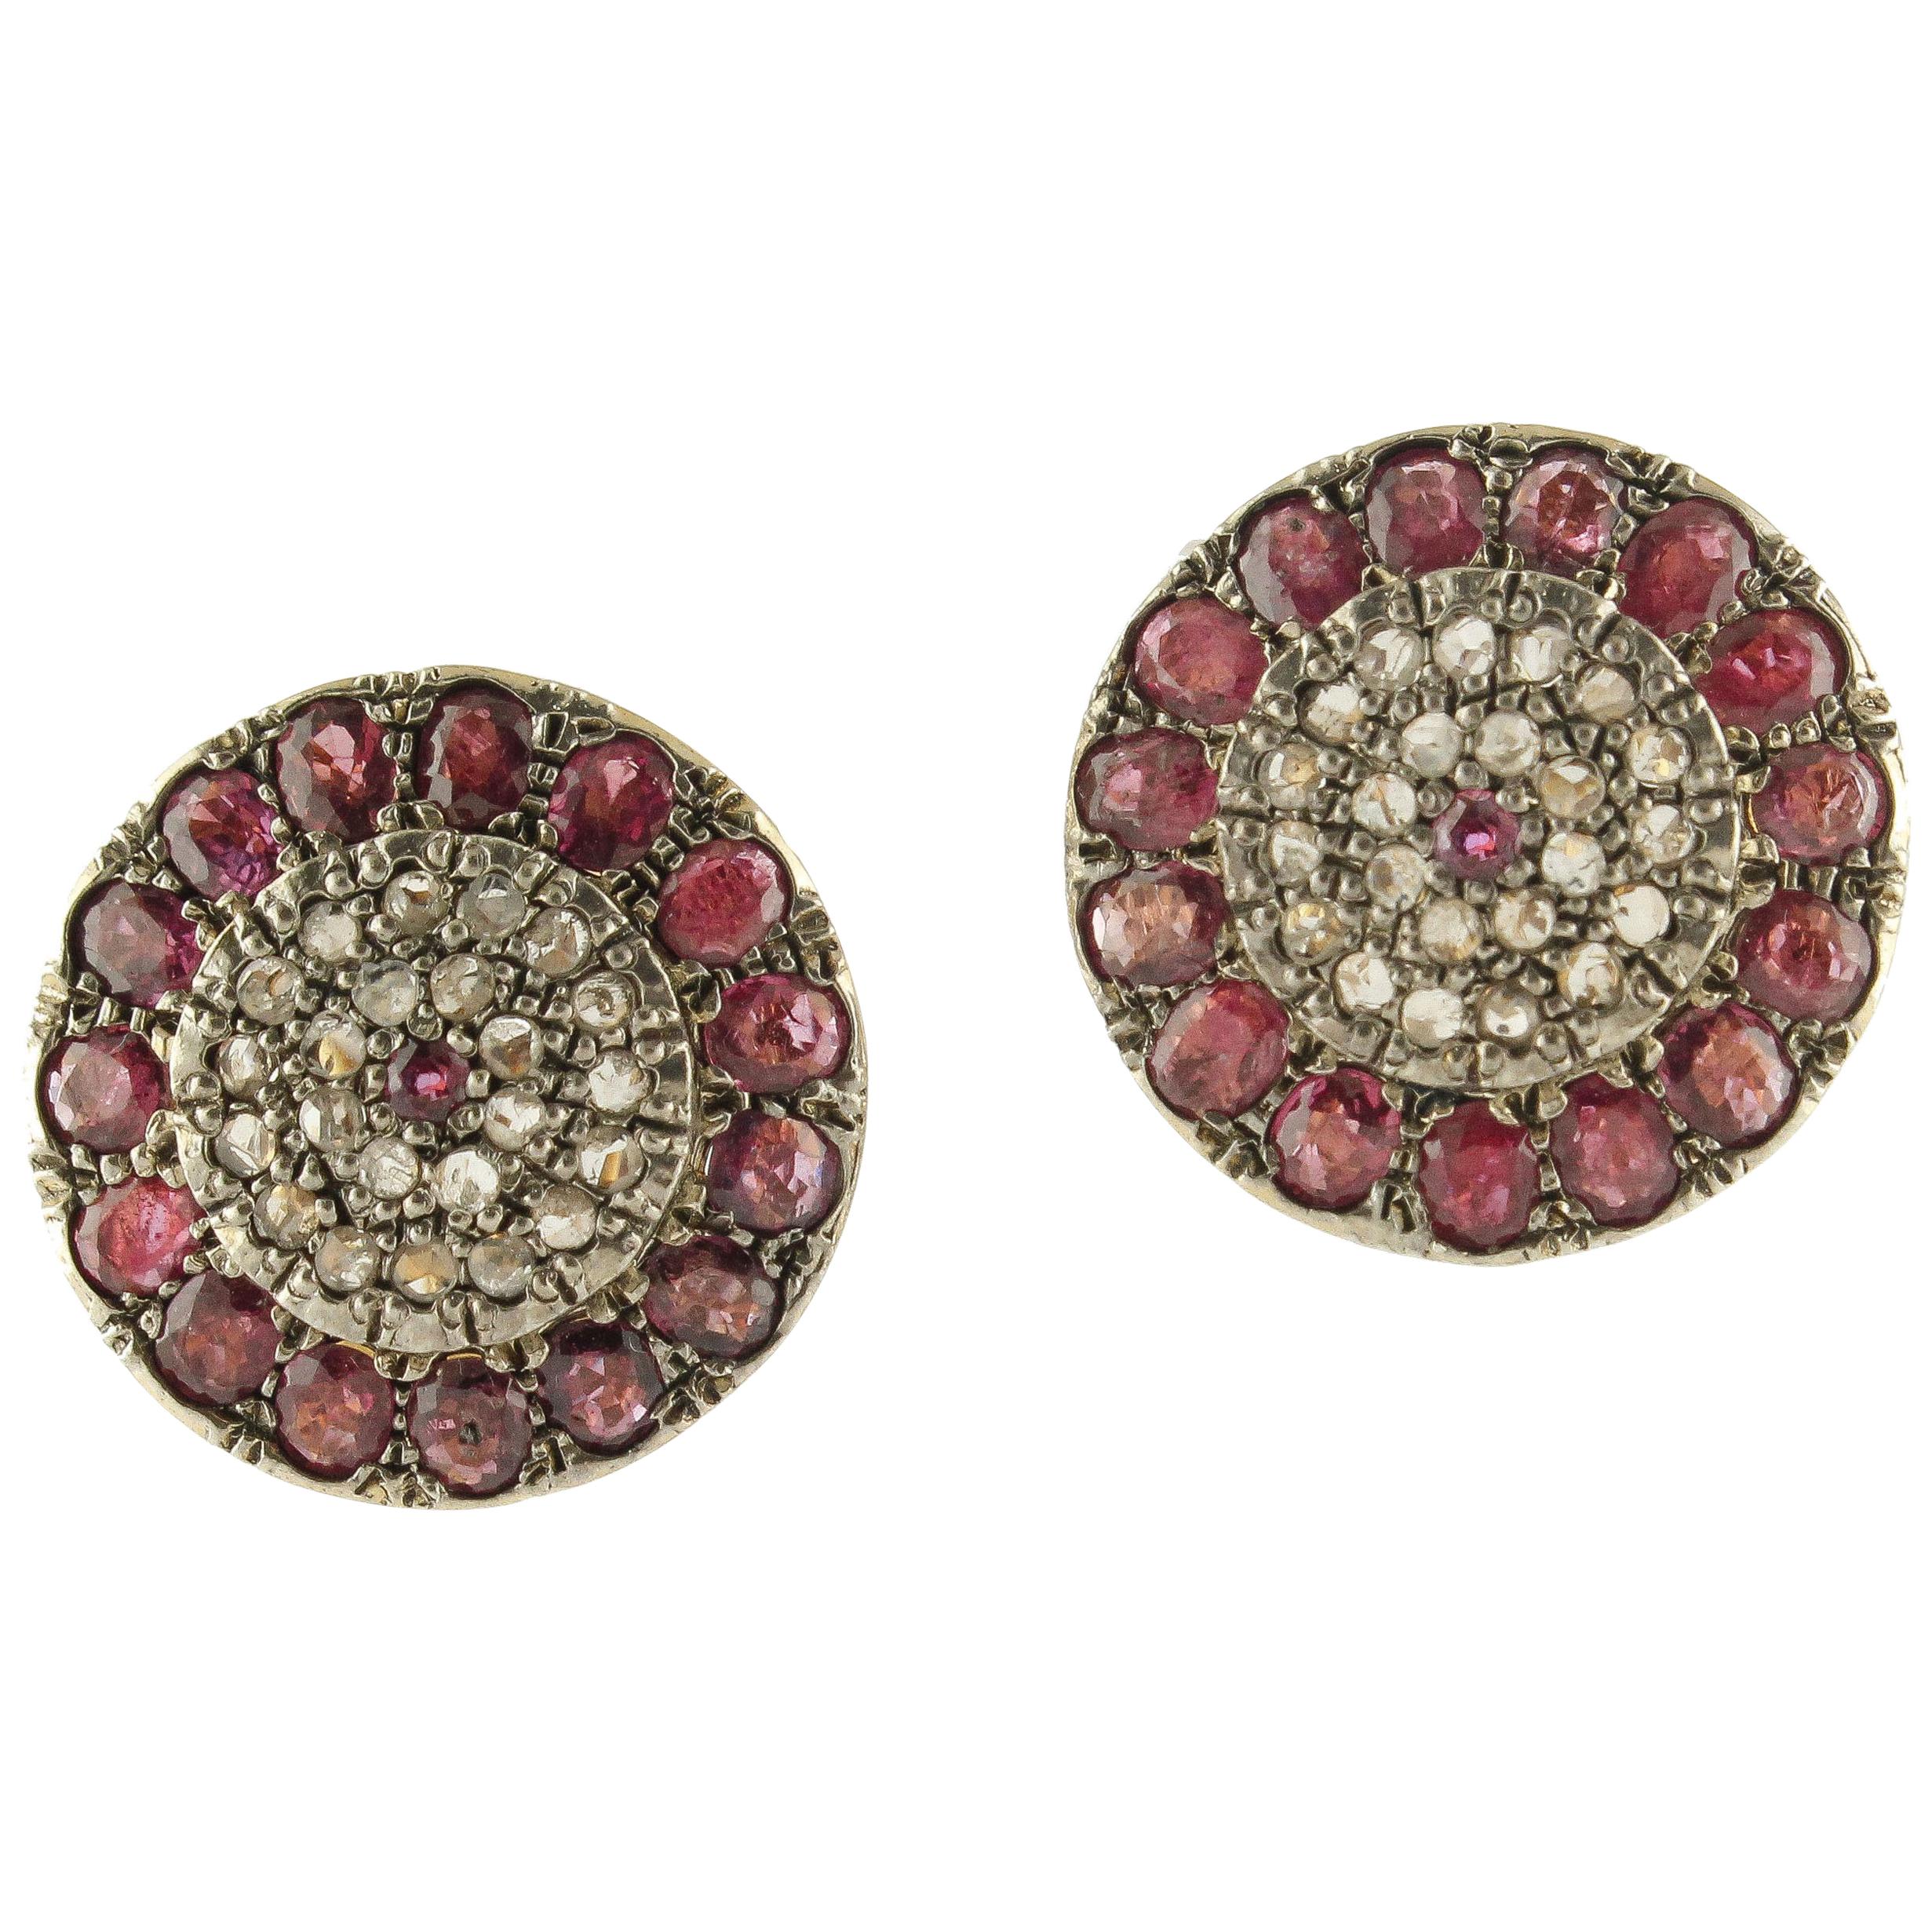 Rubies Diamonds Rose Gold and Silver Earrings